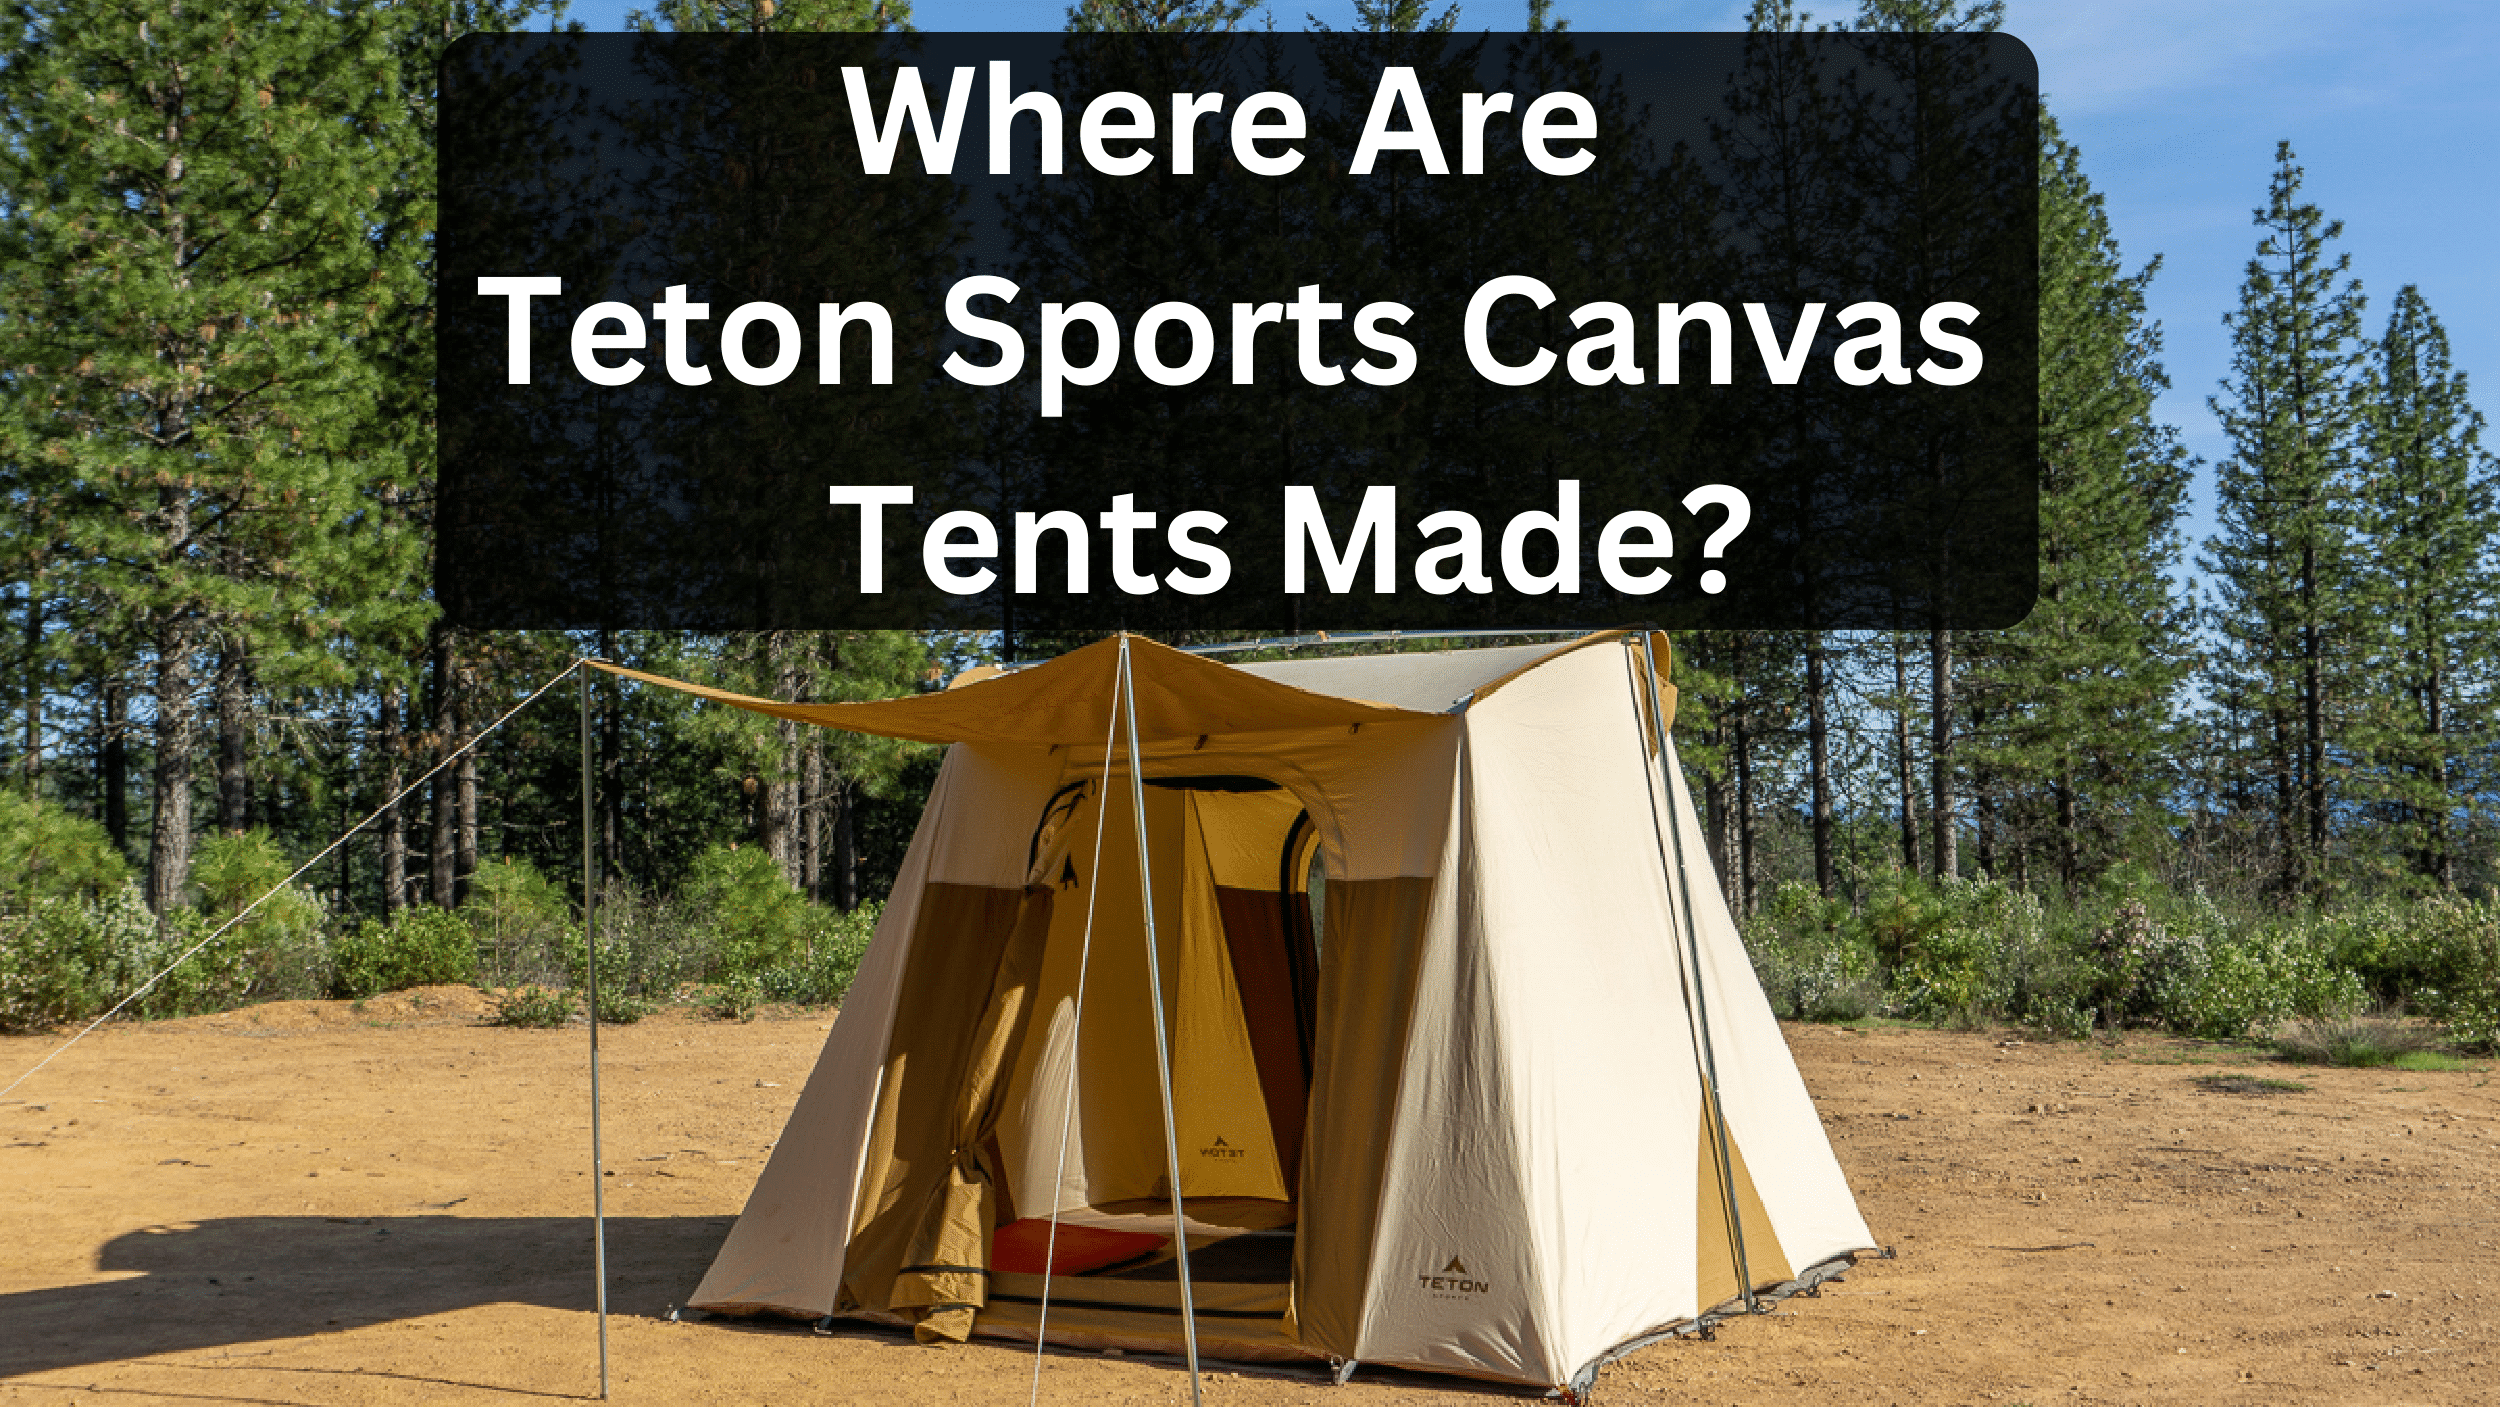 Where Are Teton Sports Canvas Tents Made?